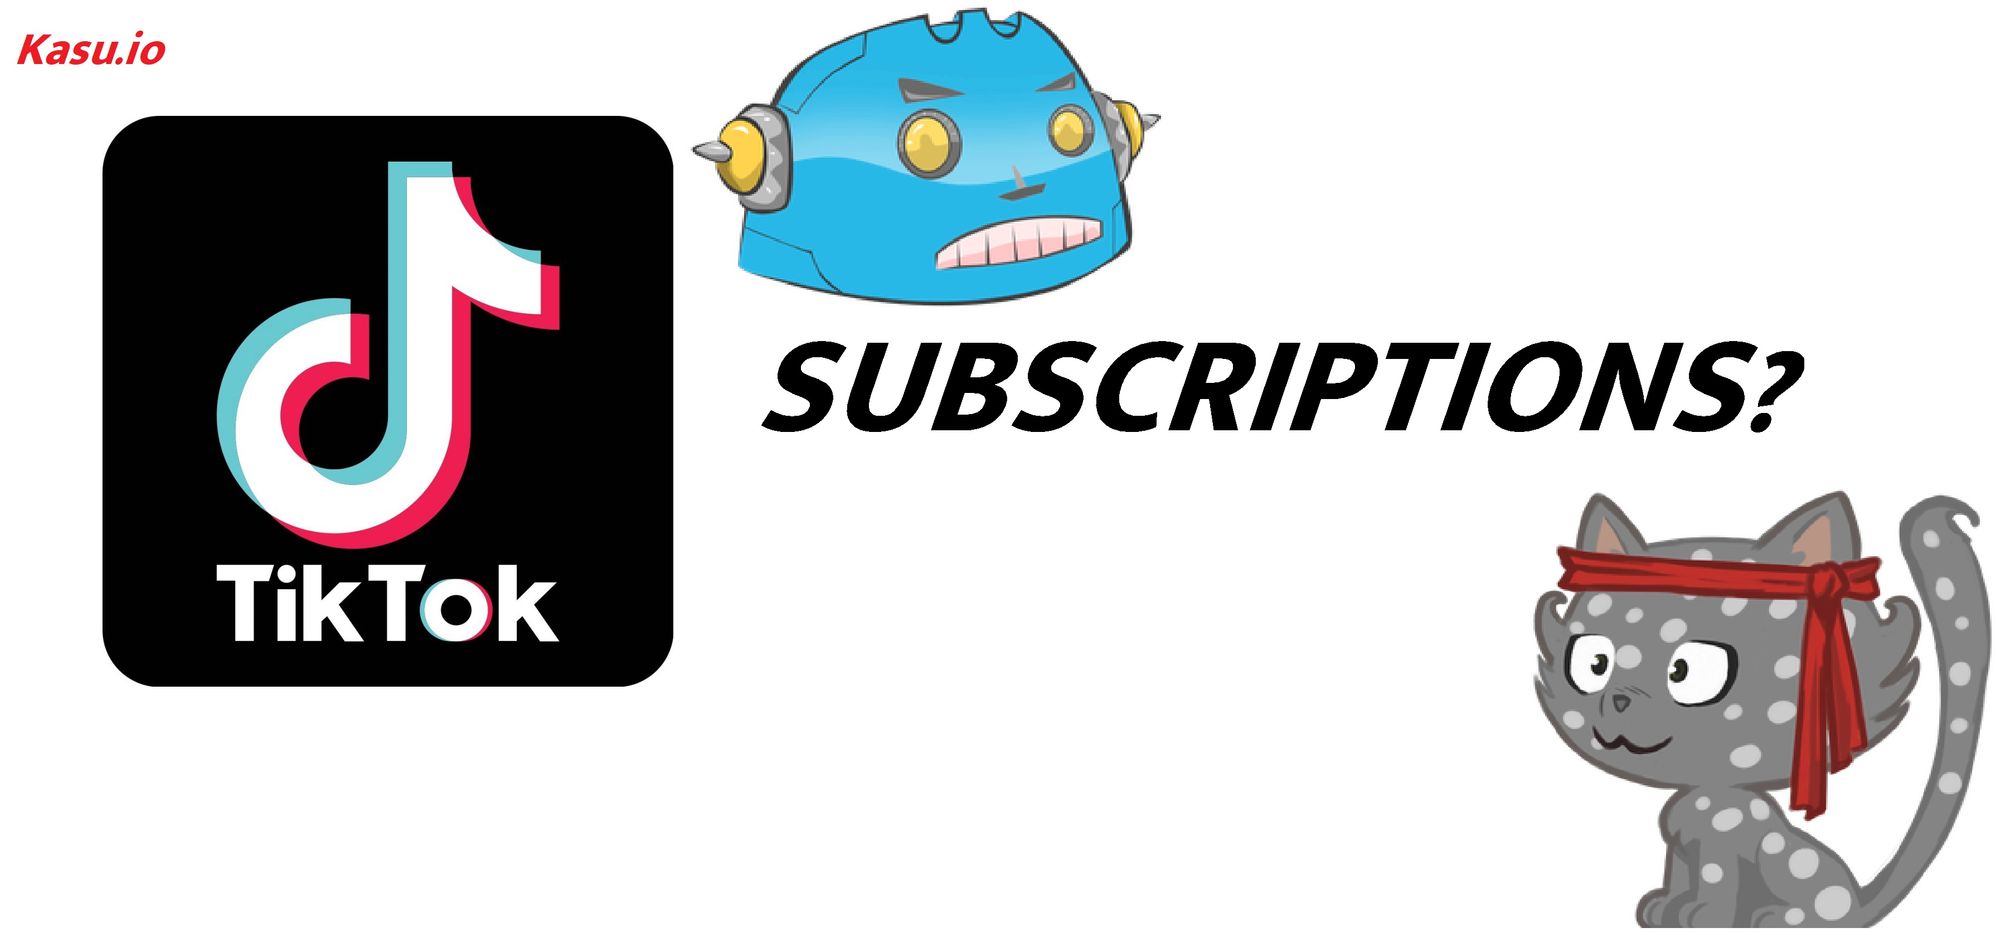 What are TikTok subscriptions?